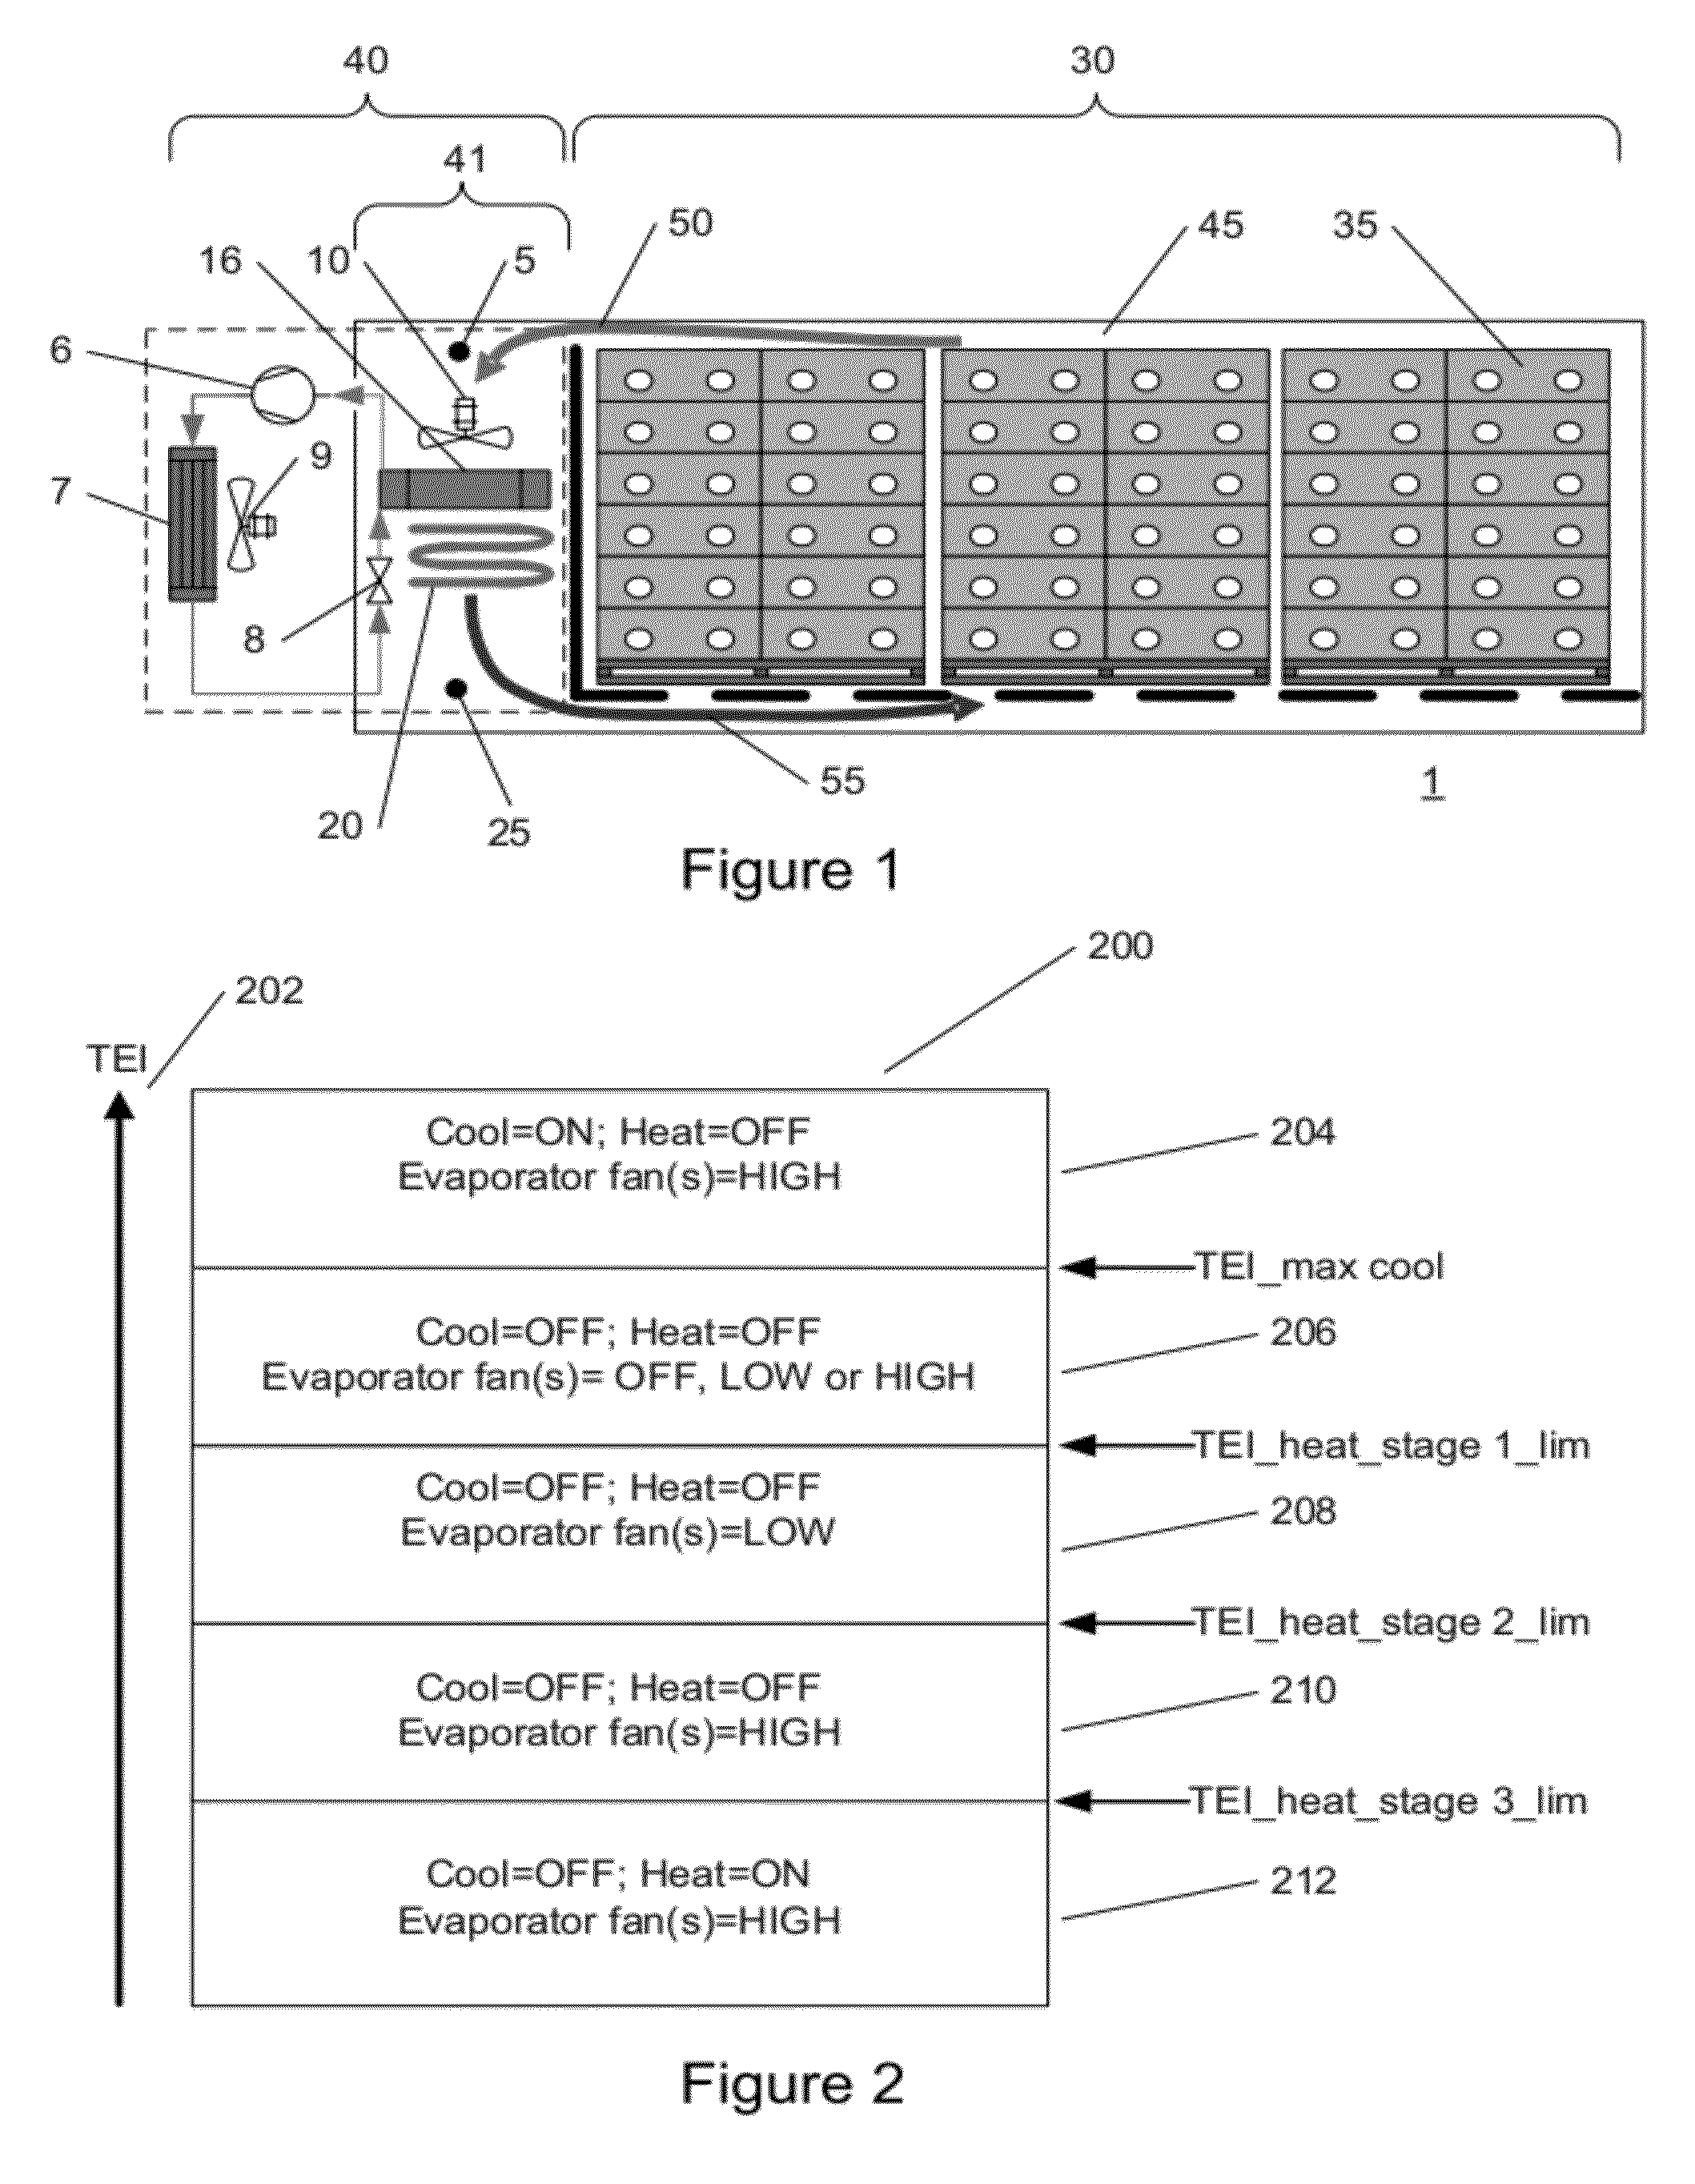 Internal air circulation control in a refrigerated transport container